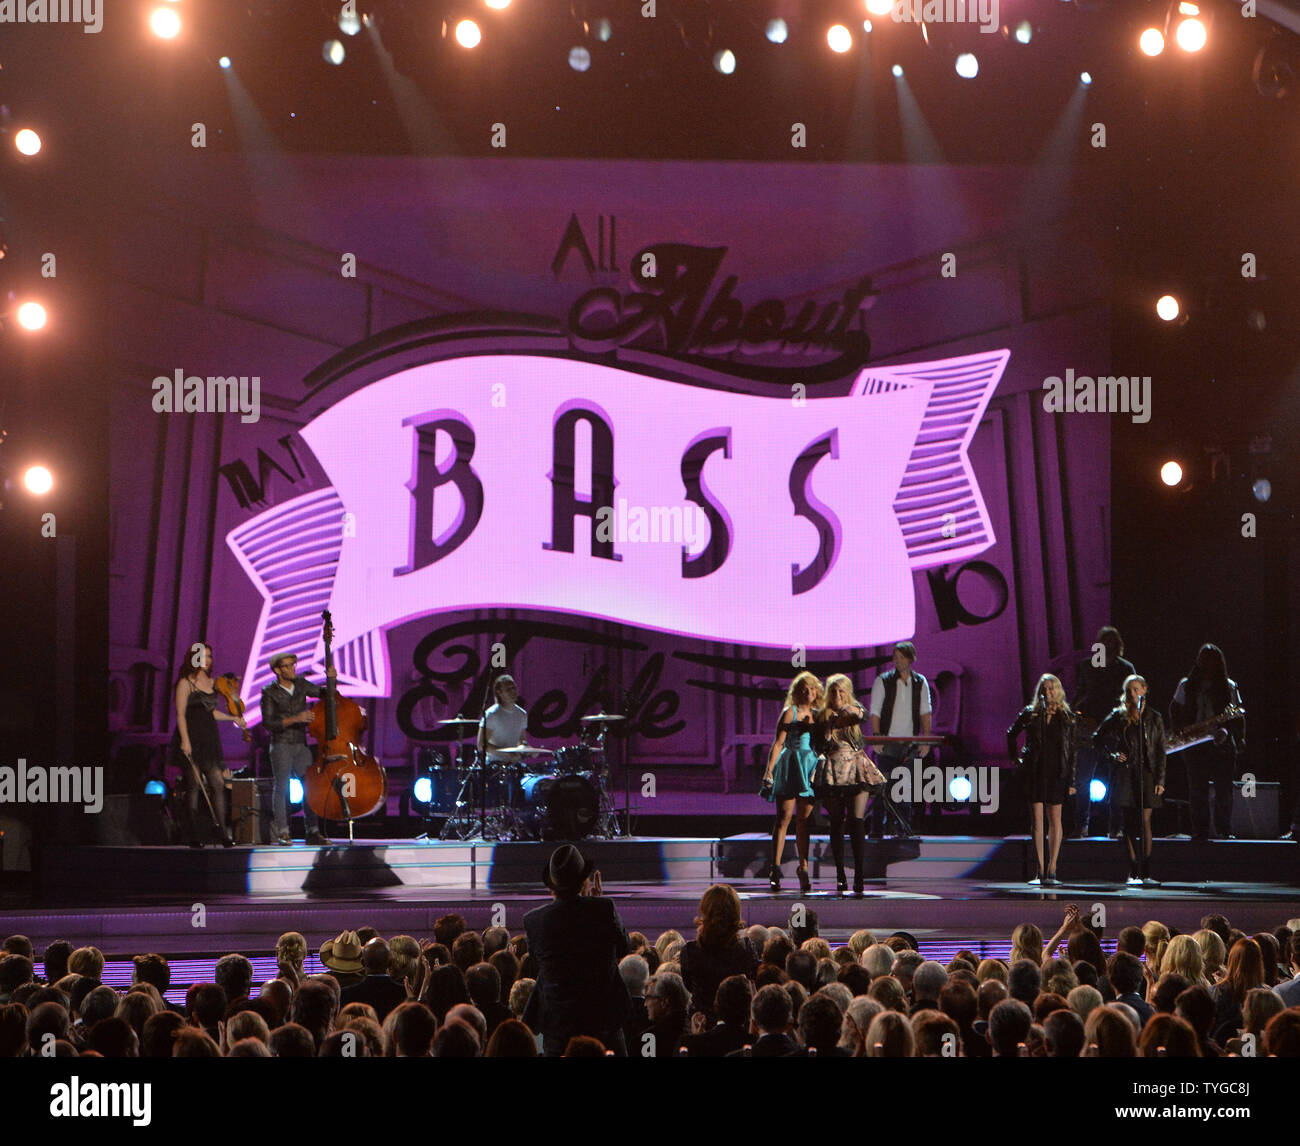 Meghan Trainor To Perform 'All About That Bass' At CMA Awards 2014: Photo  3235733, 2014 CMA Awards, Meghan Trainor Photos